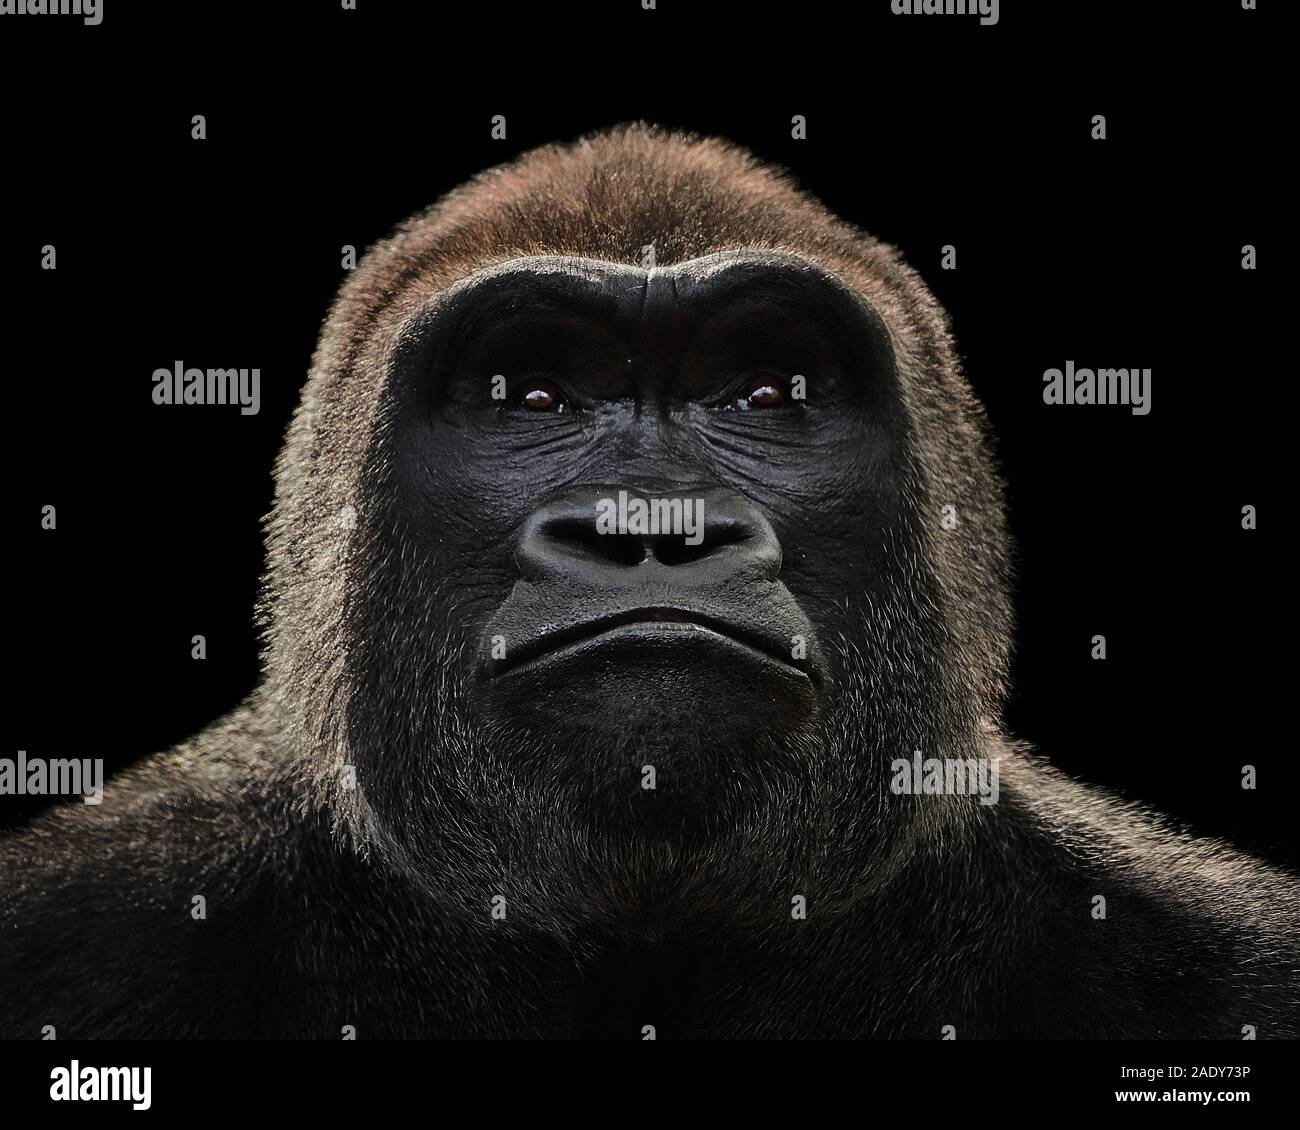 Frontal Portrait of a Western Lowland Gorilla Against a Black Background Stock Photo